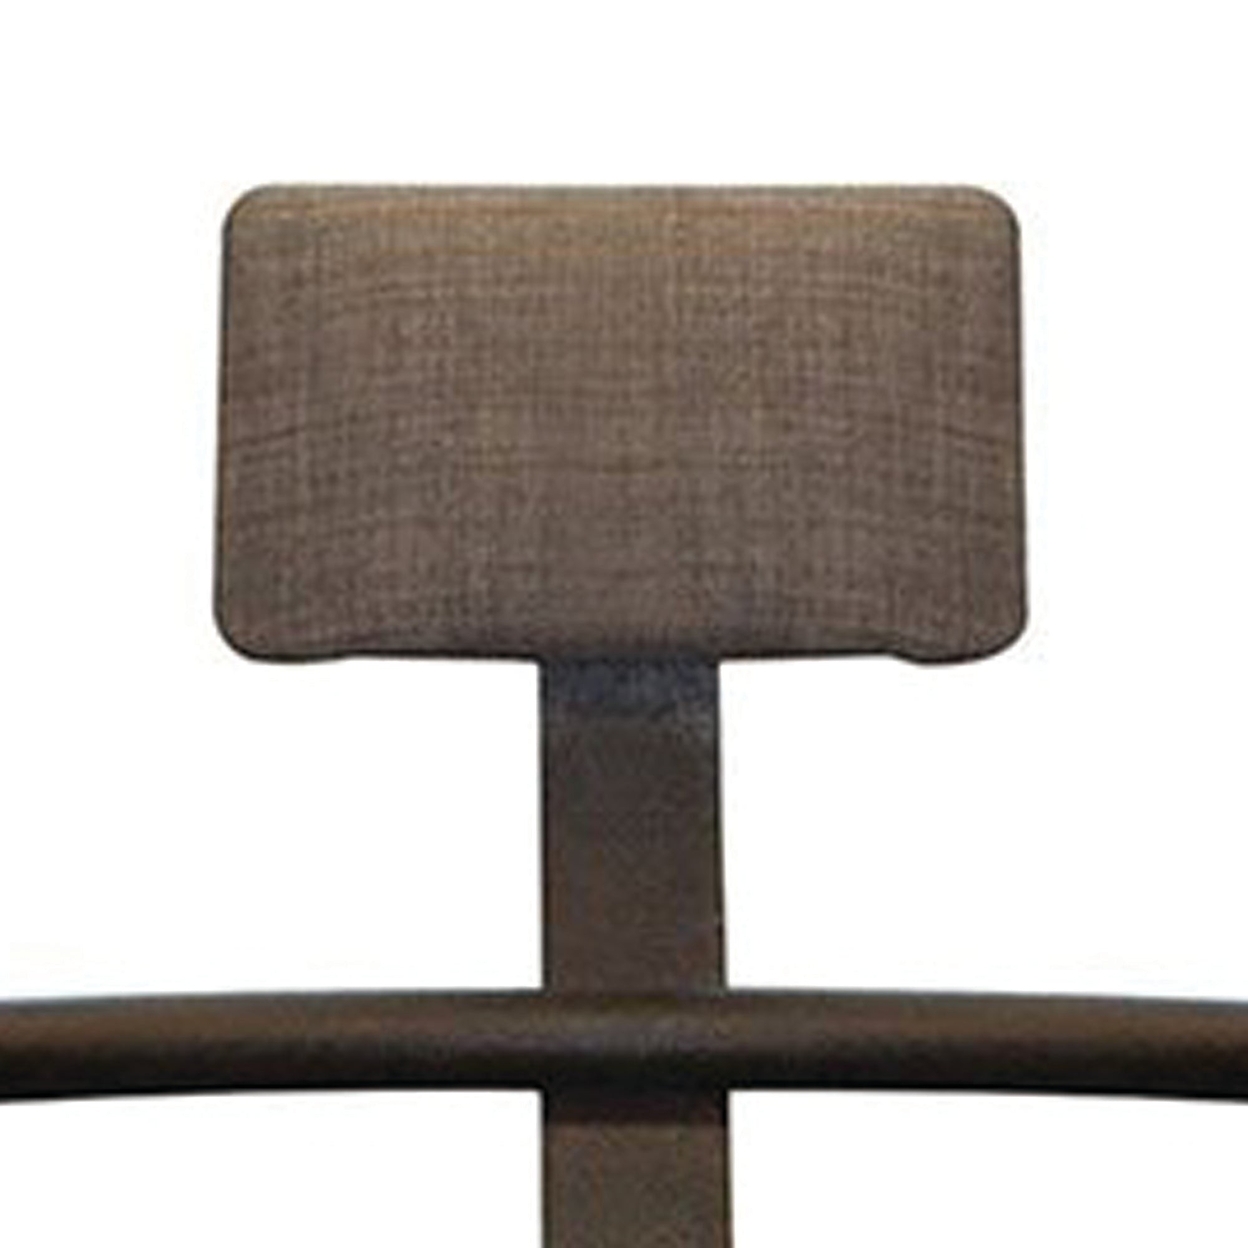 23 Inch Cantilever Chair, Padded Headrest, Wood Seat And Arms, Black Metal- Saltoro Sherpi